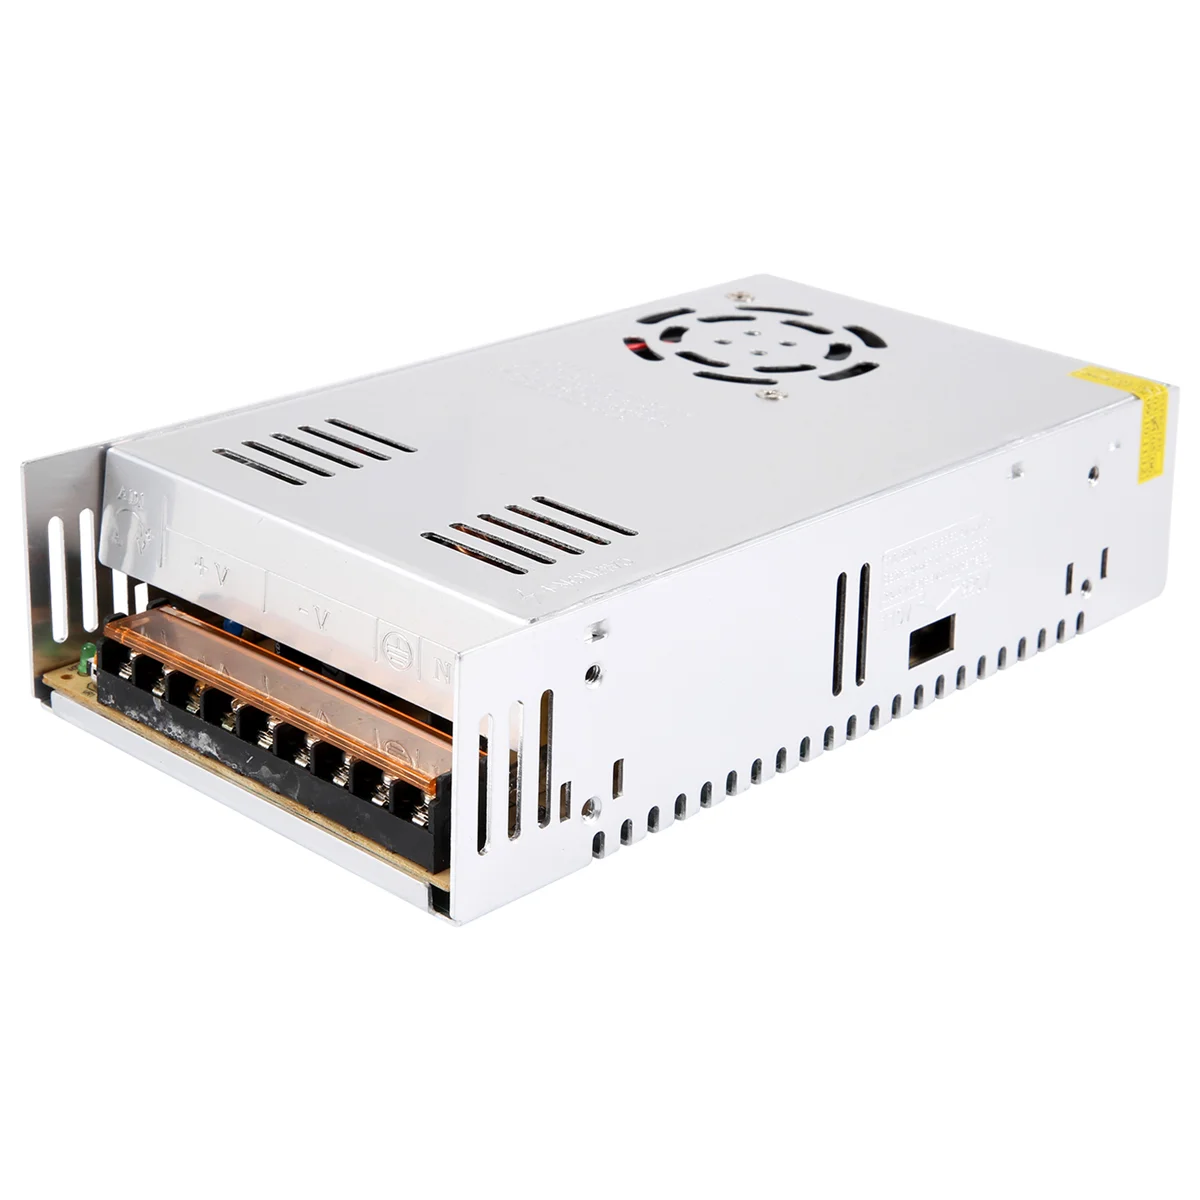 

48V 12.5A 600W Switch Power Supply for Monitoring Equipment, Industrial Automation, PLC Control Cabinet, LED Equipment